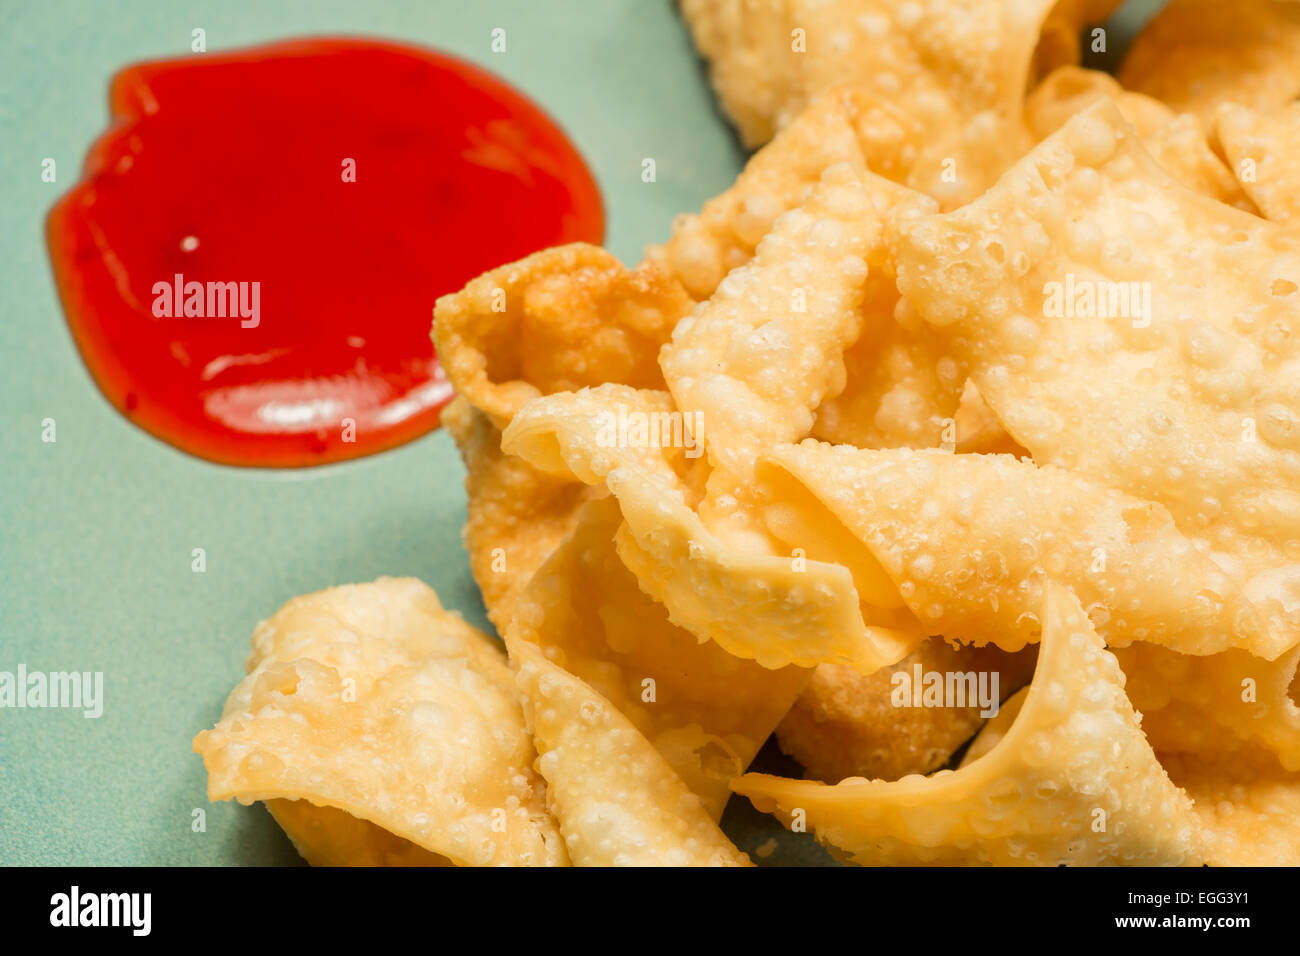 Fried Wontons Sweet and Sour 2 Stock Photo - Alamy